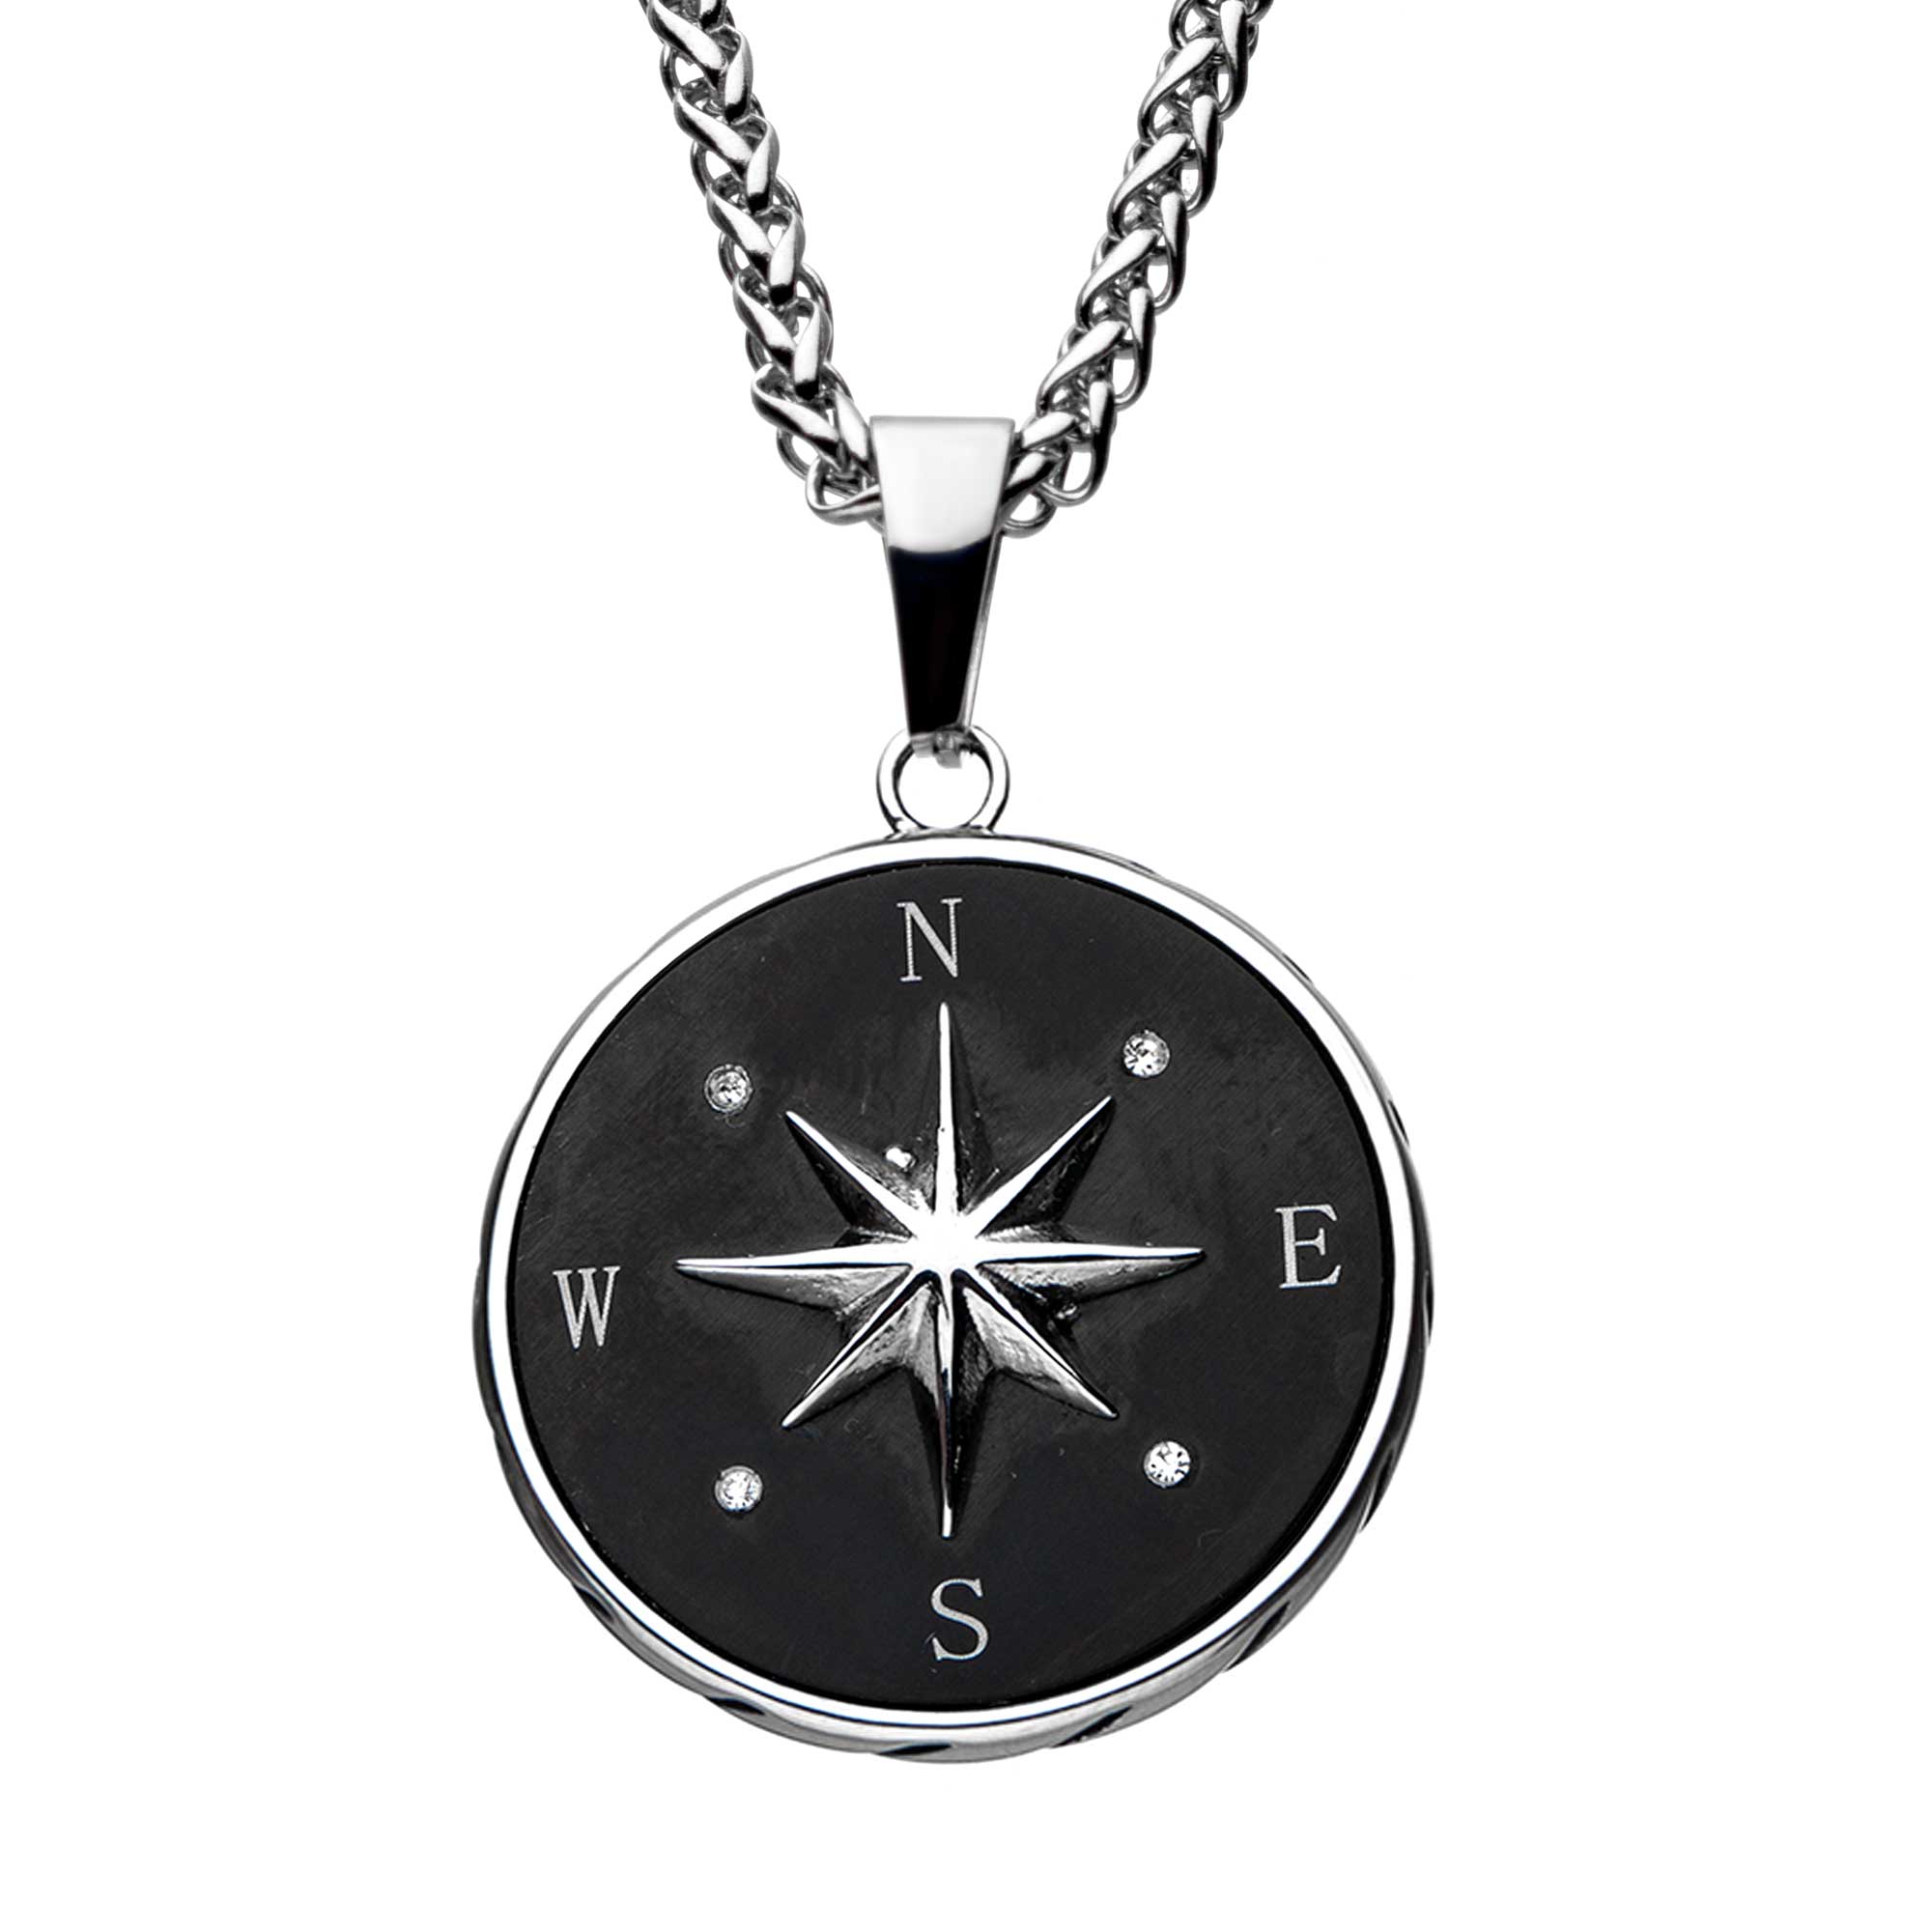 Stainless Steel and Black Plated Compass Pendant with Chain Jayson Jewelers Cape Girardeau, MO